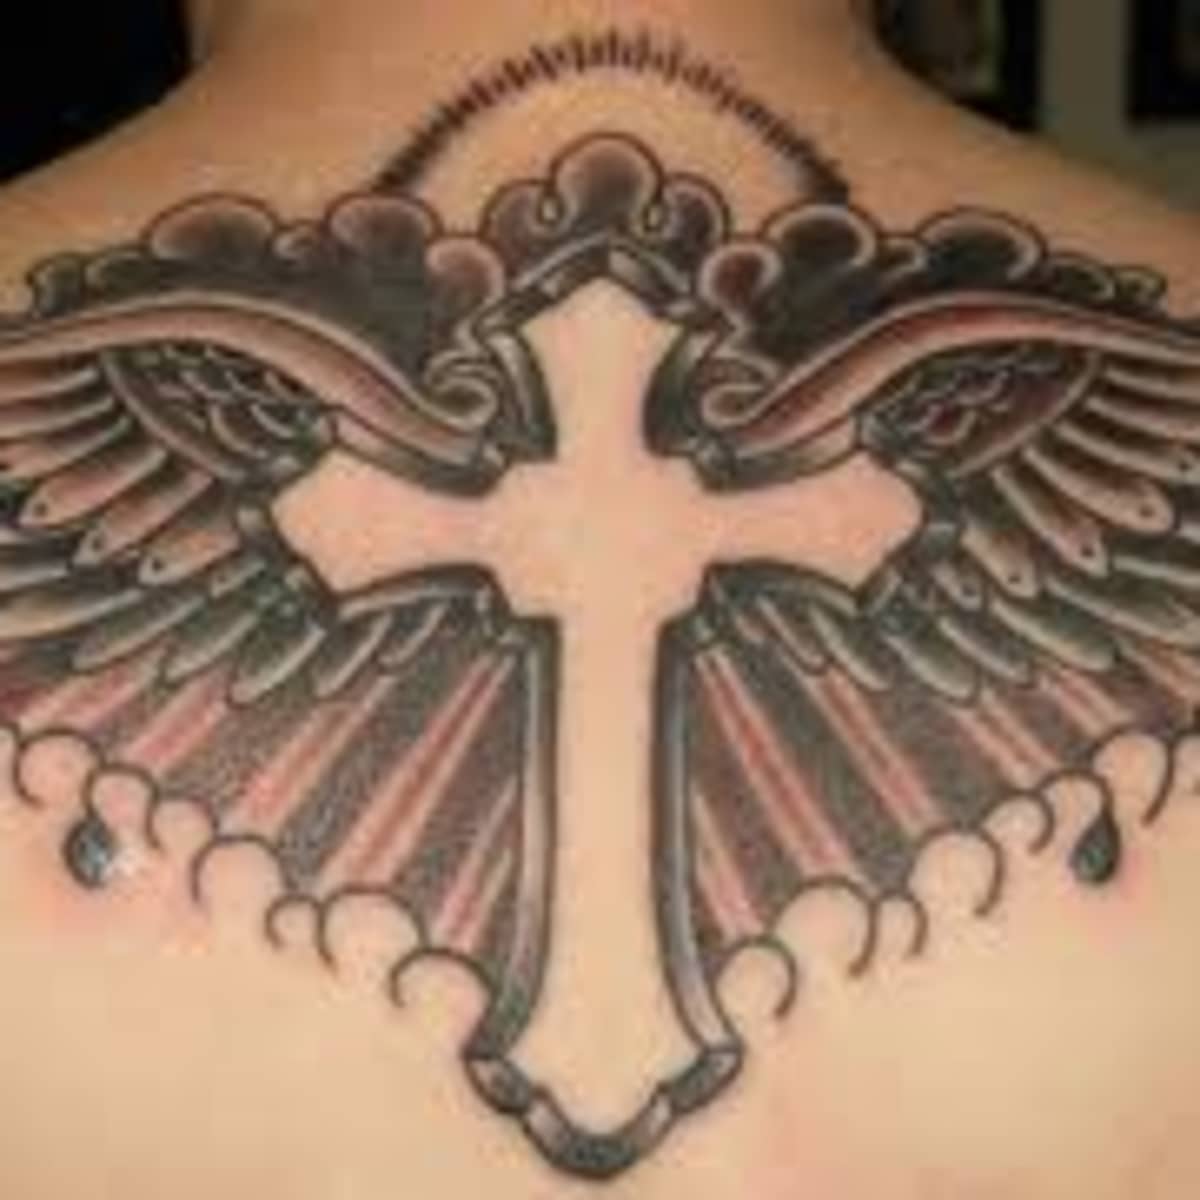 86 Christian Tattoo Ideas for Men To Show Your Devotion